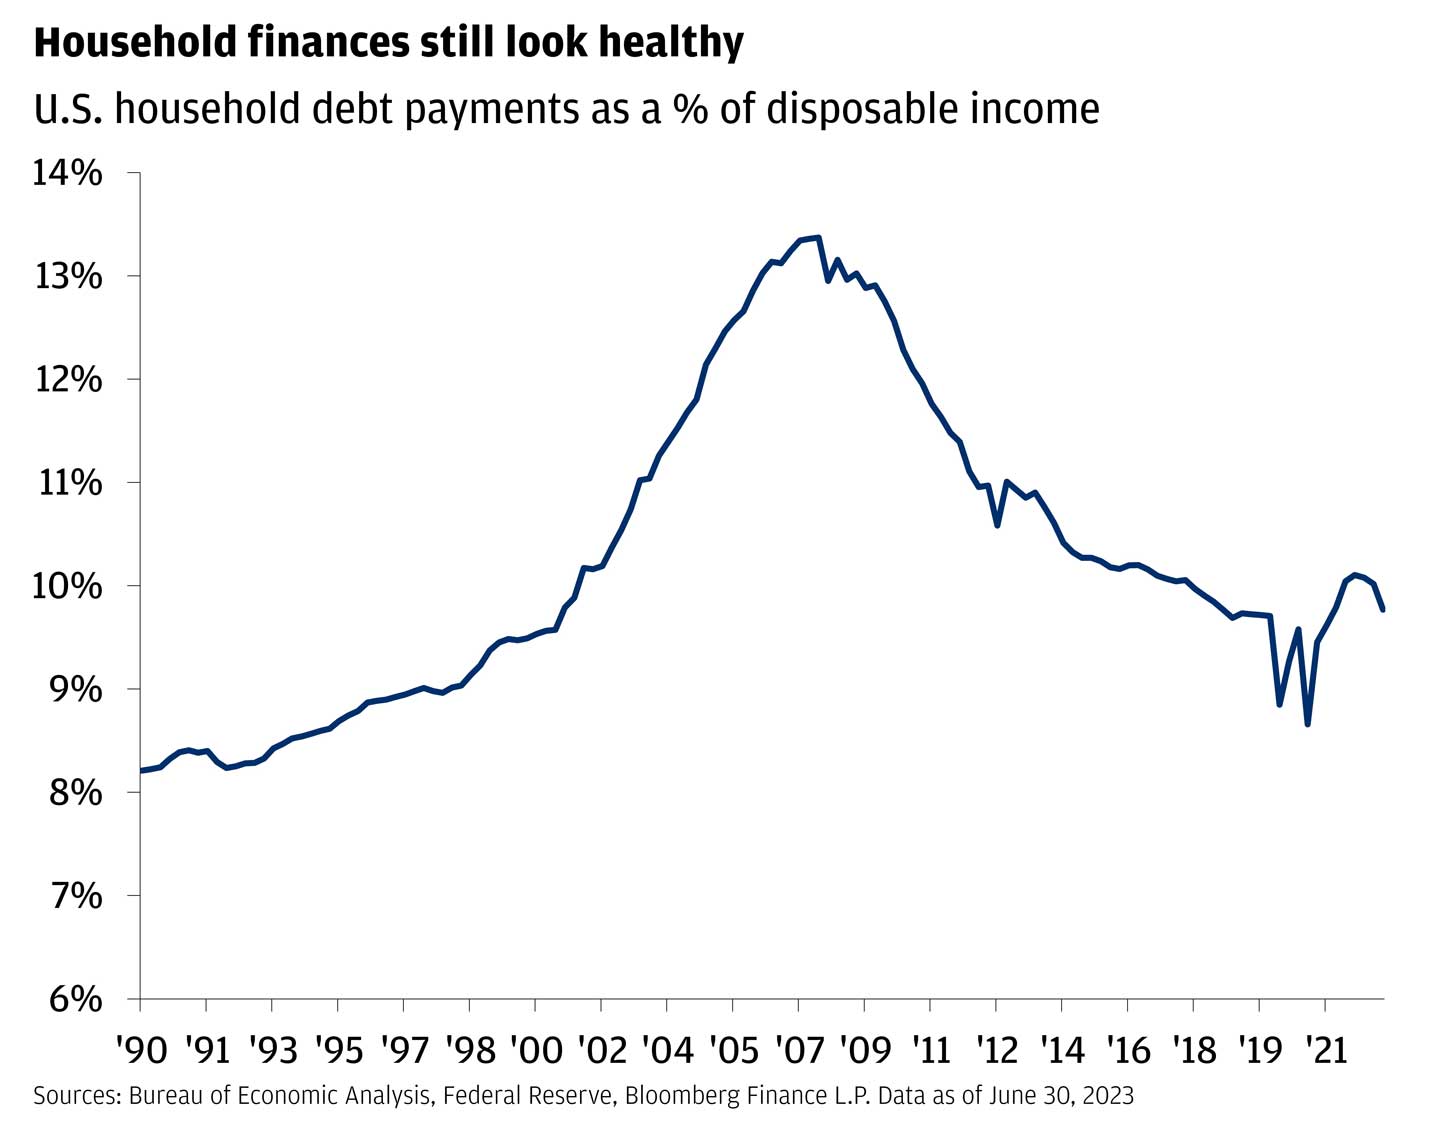 This line graph describes the U.S. household debt payments as a % of disposable income.